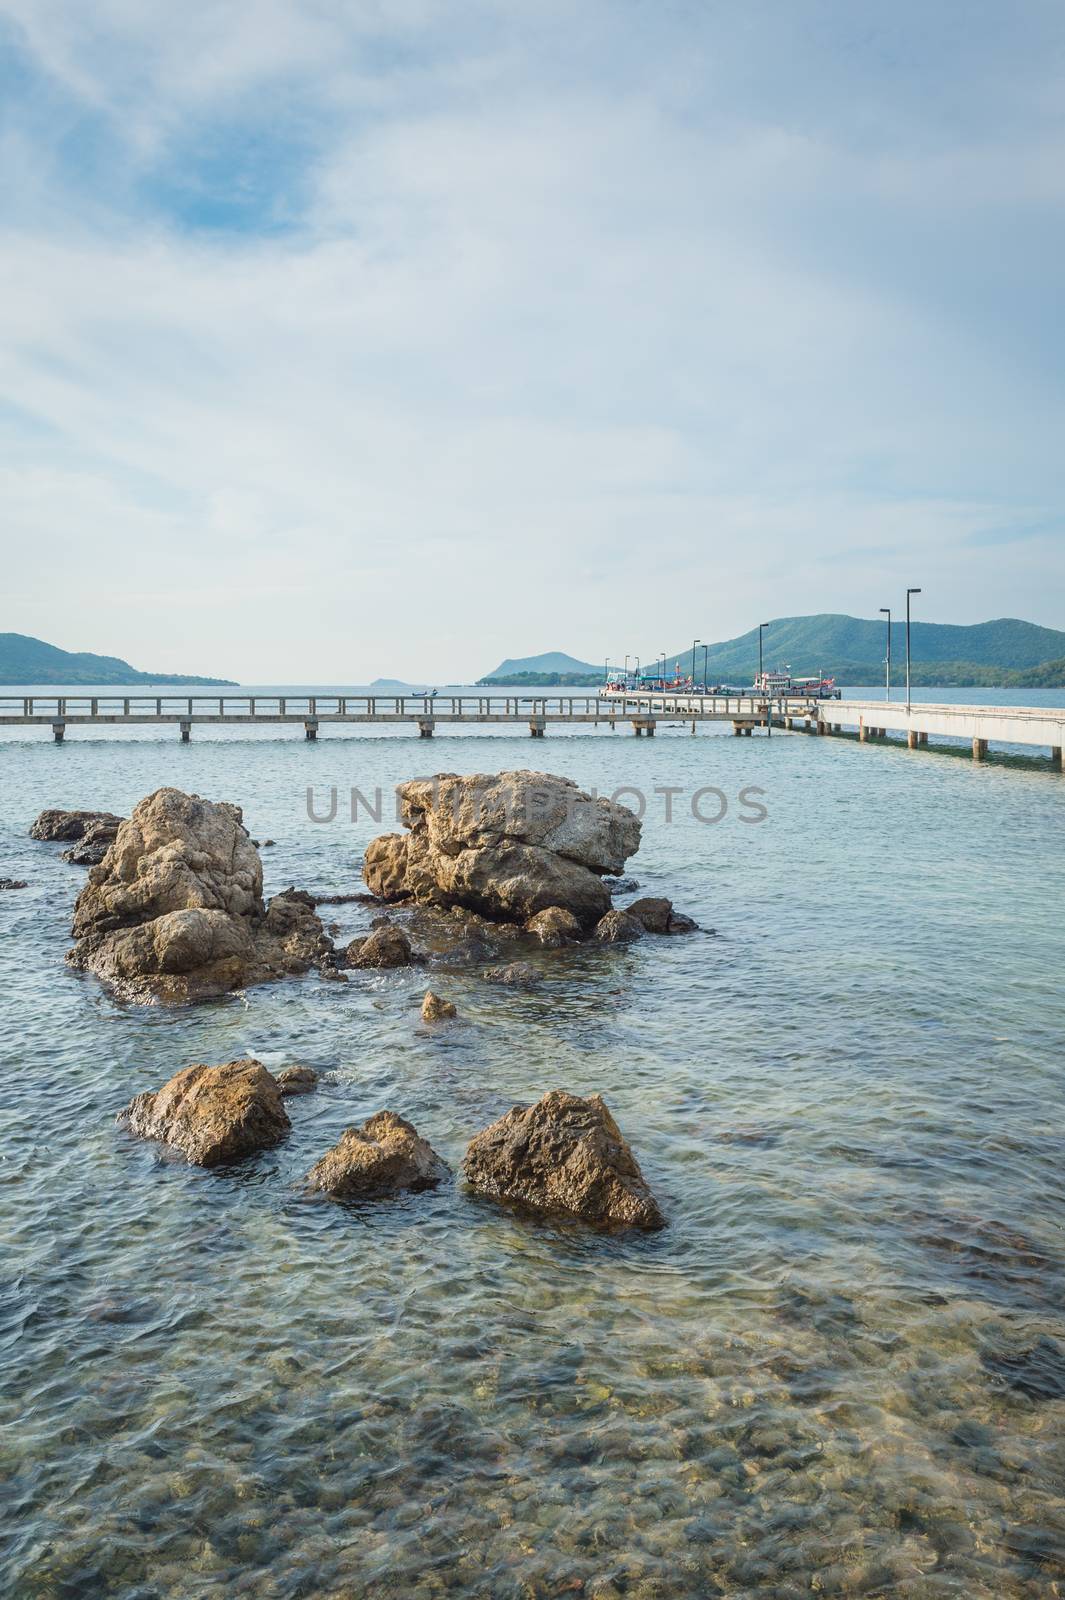 Landscape of rock in the ocean with bridge by sayhmog